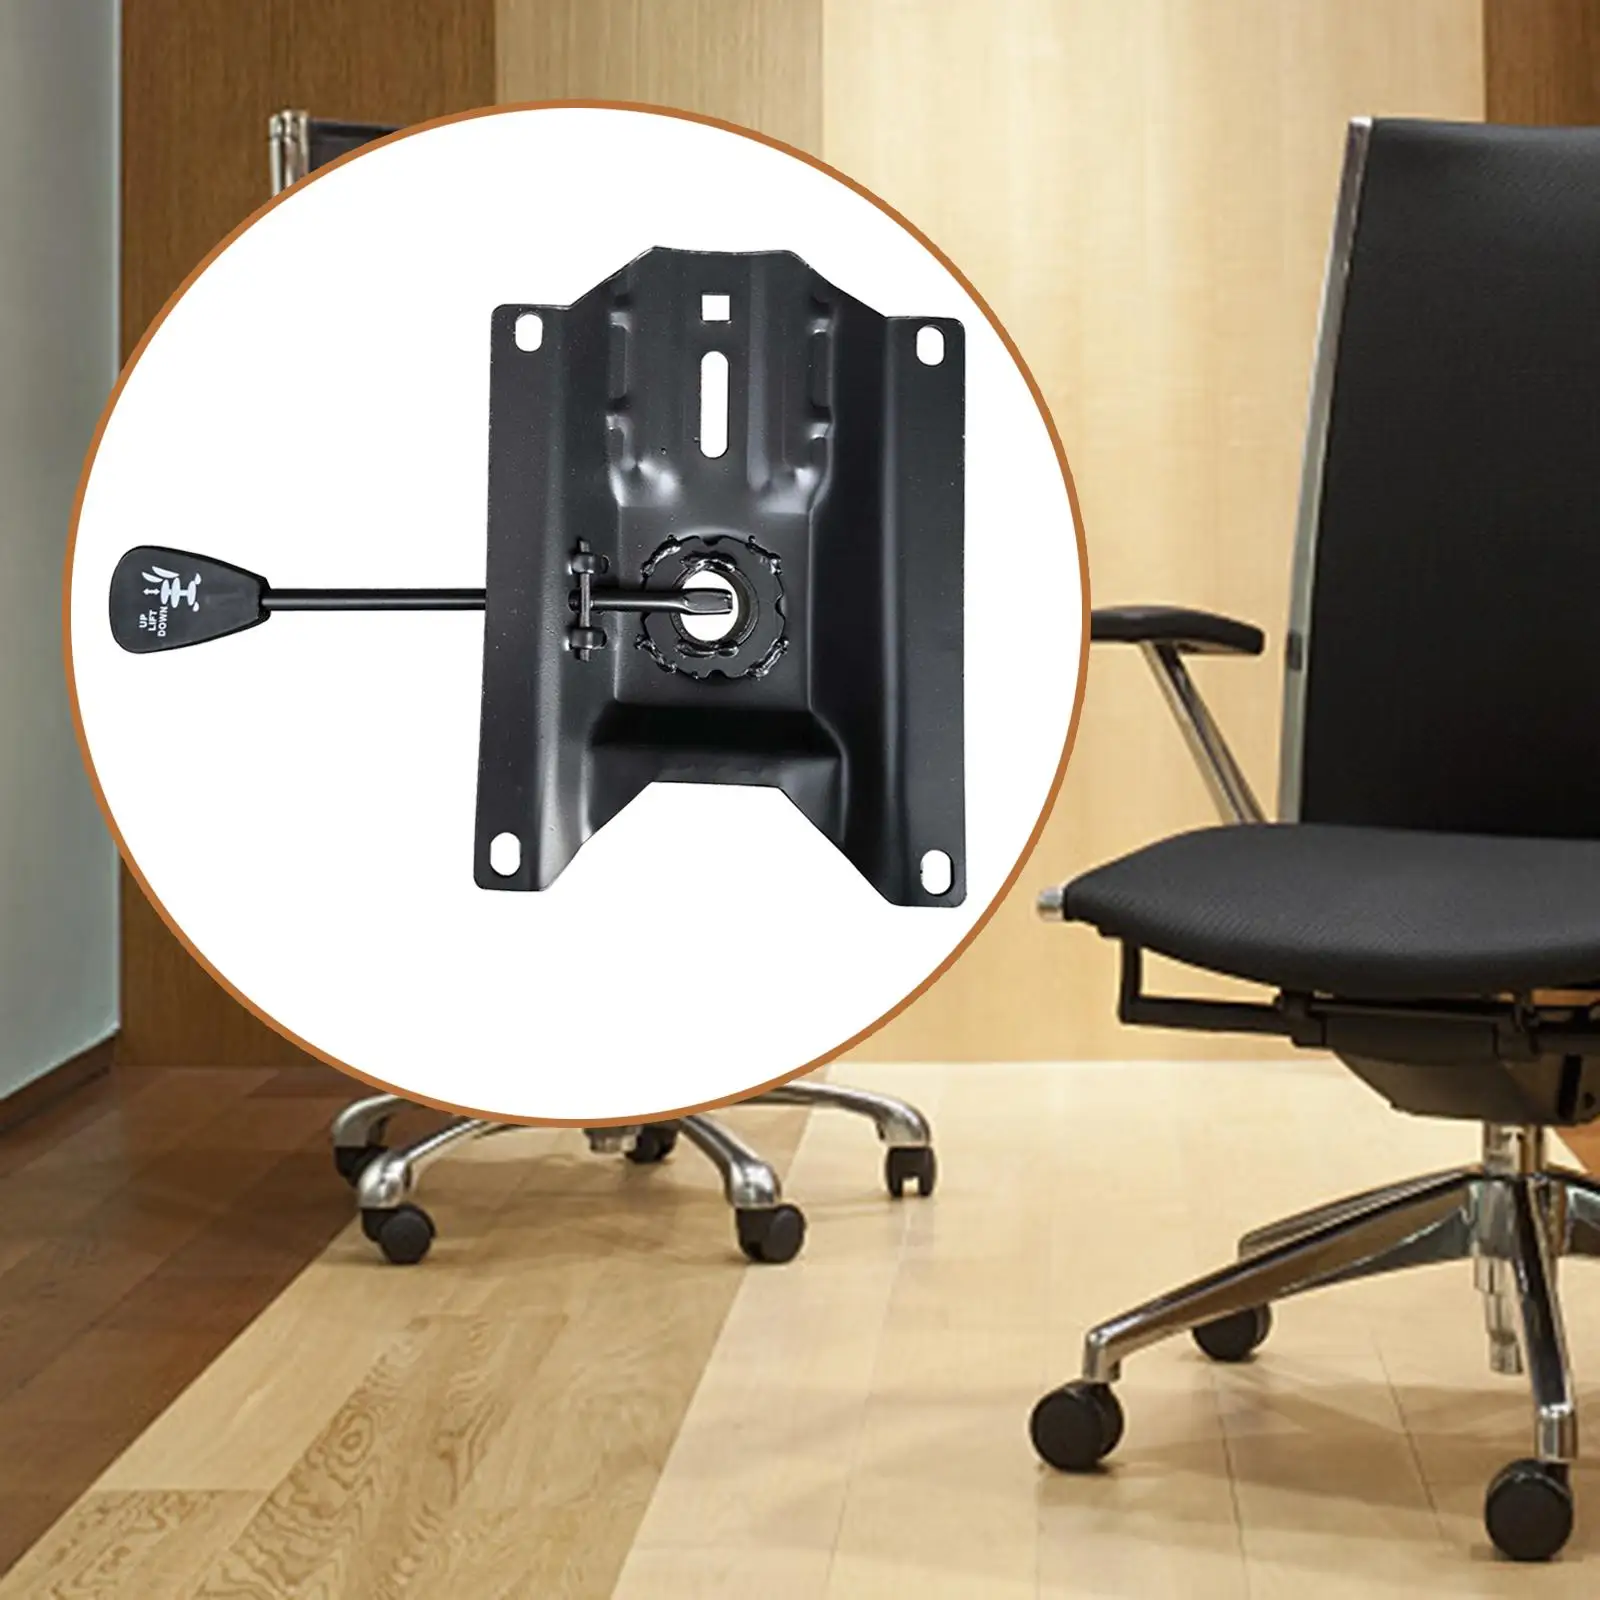 Tilt Control and Gas Lift Adjustable Replacing Swivel Chair Bottom Plate Base task Chair Desk Chair Furniture Gaming Chair